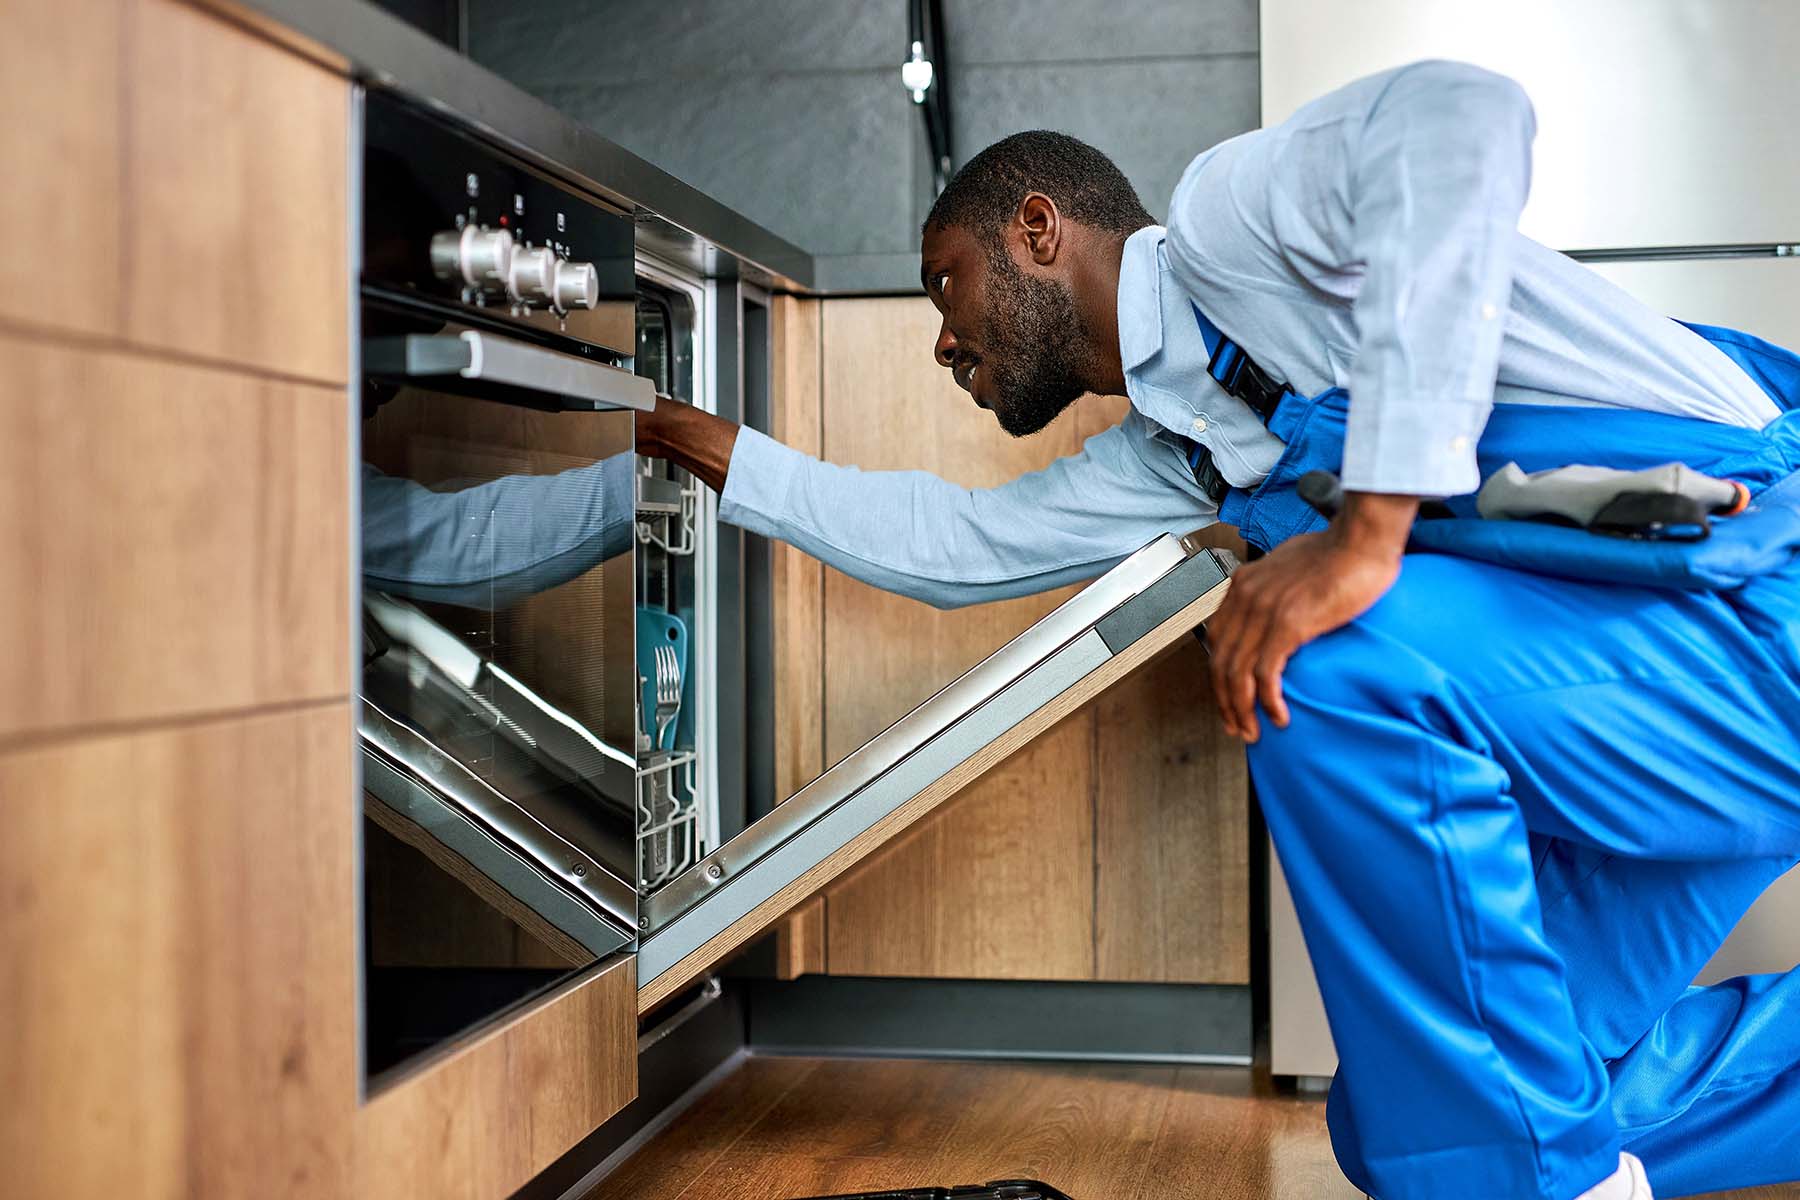 A technician in blue overalls inspects a dishwasher.